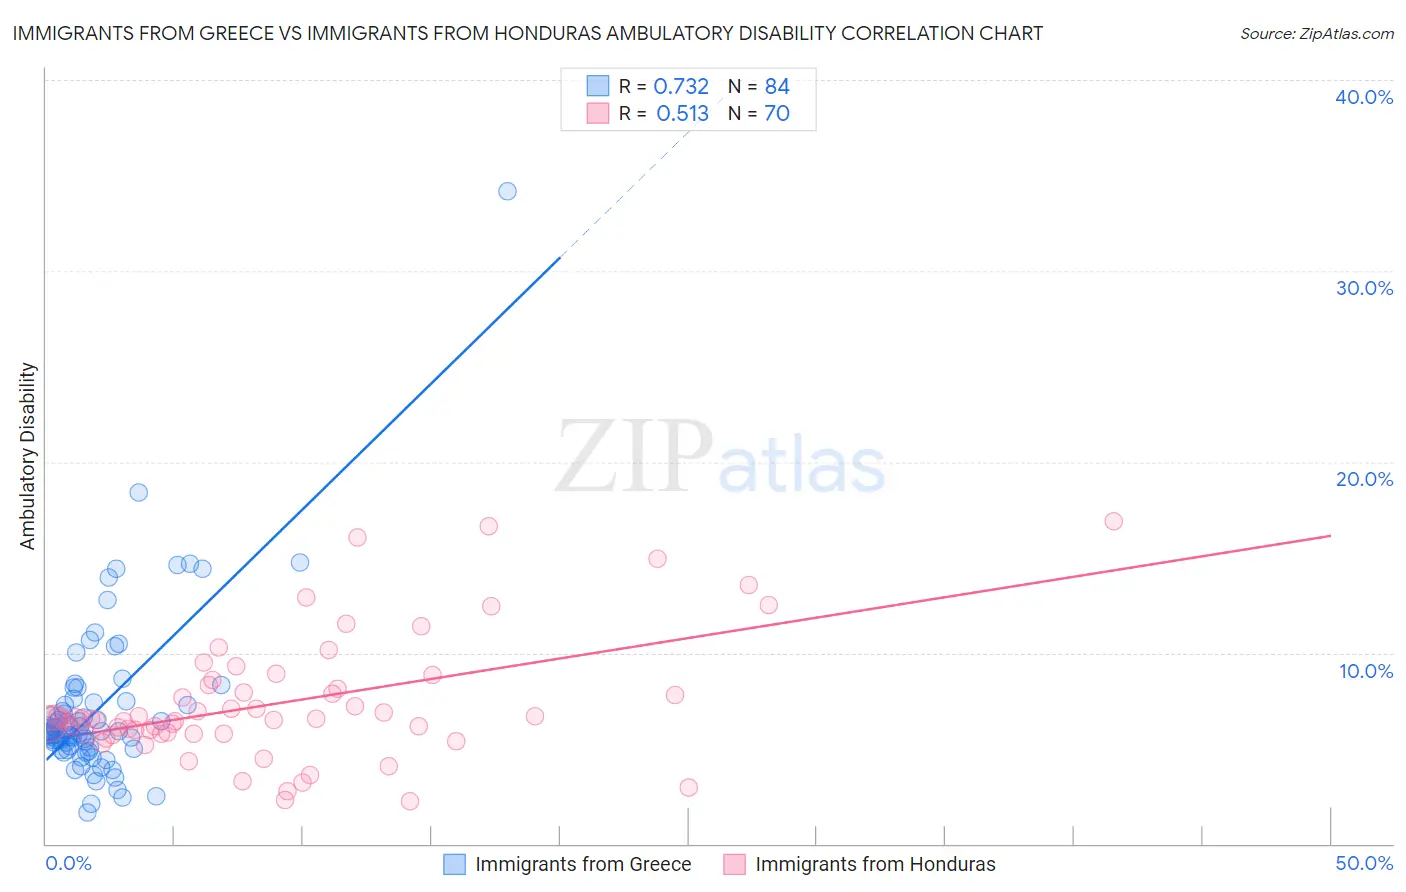 Immigrants from Greece vs Immigrants from Honduras Ambulatory Disability